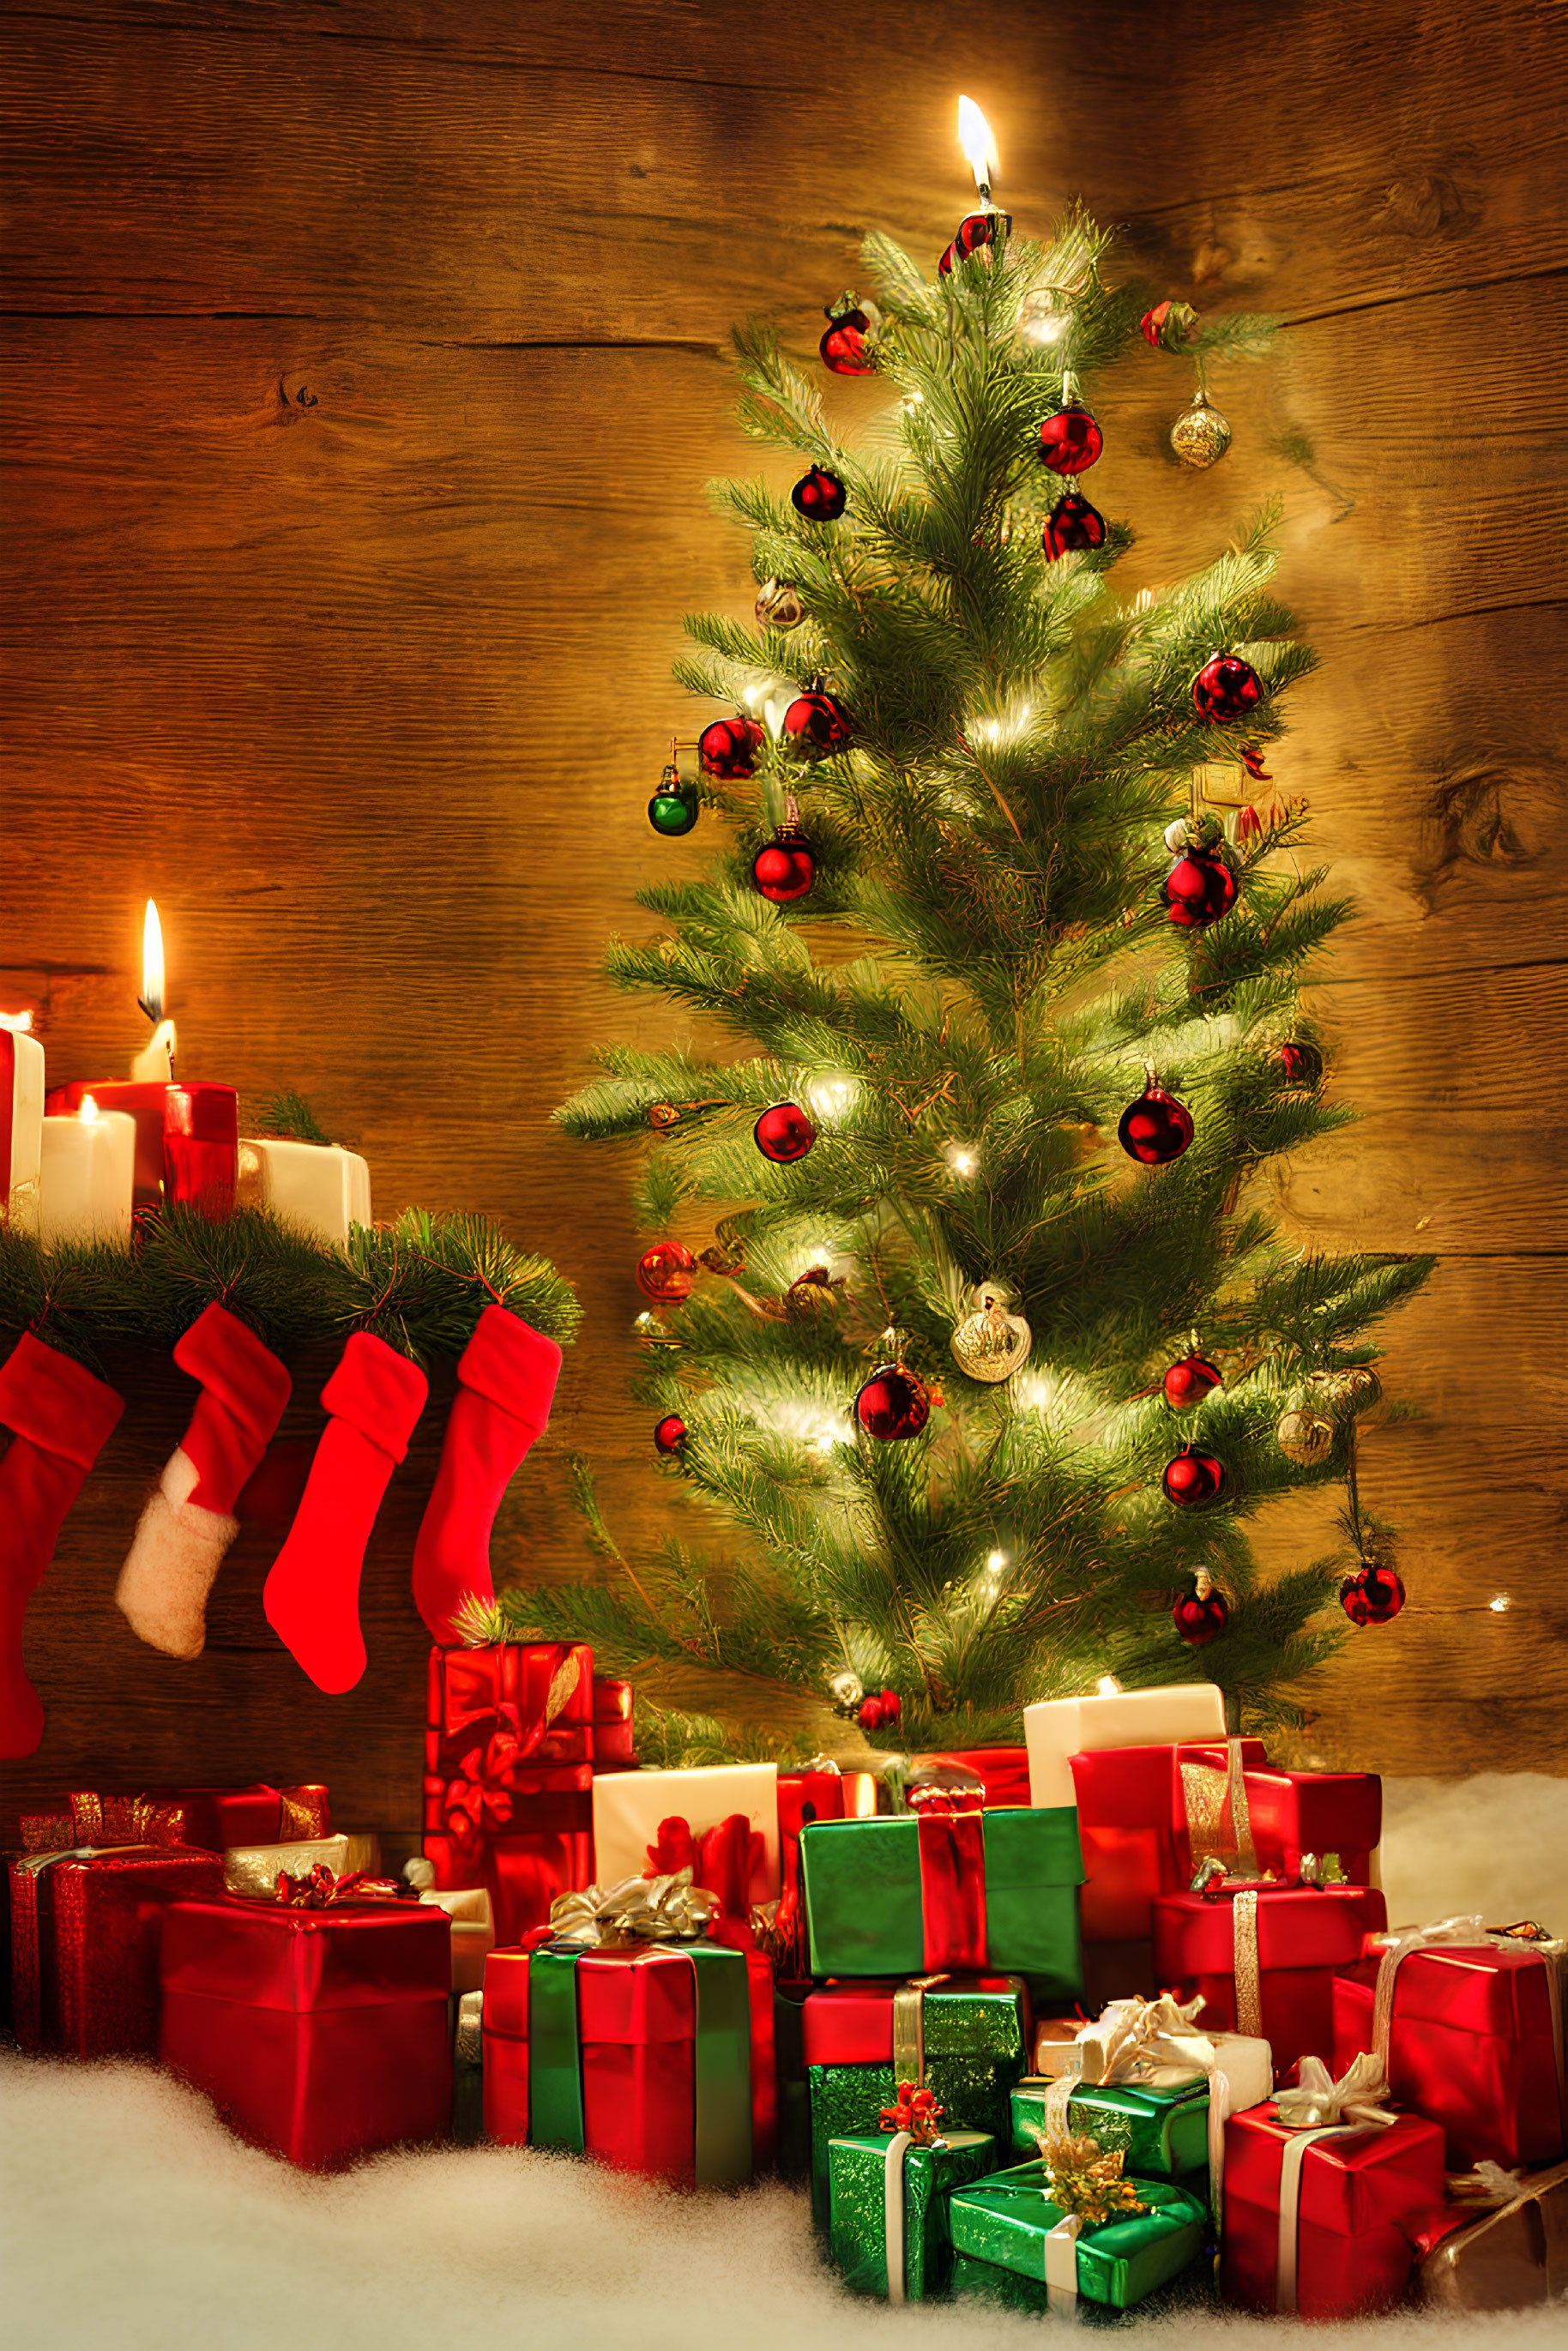 Cozy Christmas scene with decorated tree, candles, stockings, and presents